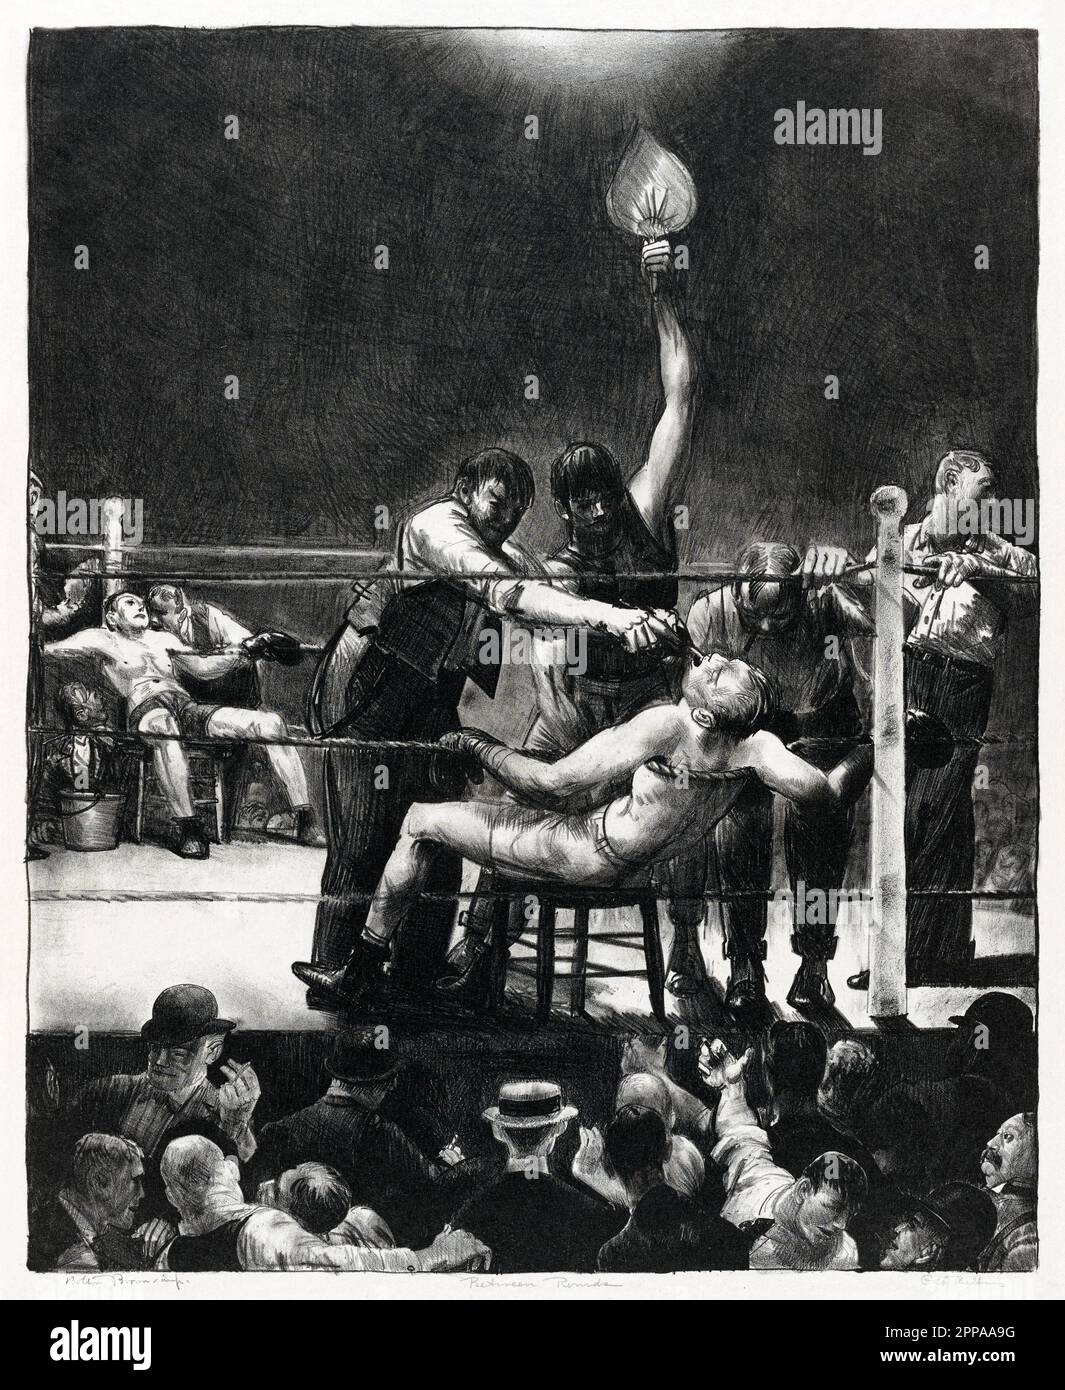 Between rounds, small, second stone in high resolution by George Wesley Bellows. Original from the Boston Public Library. Stock Photo